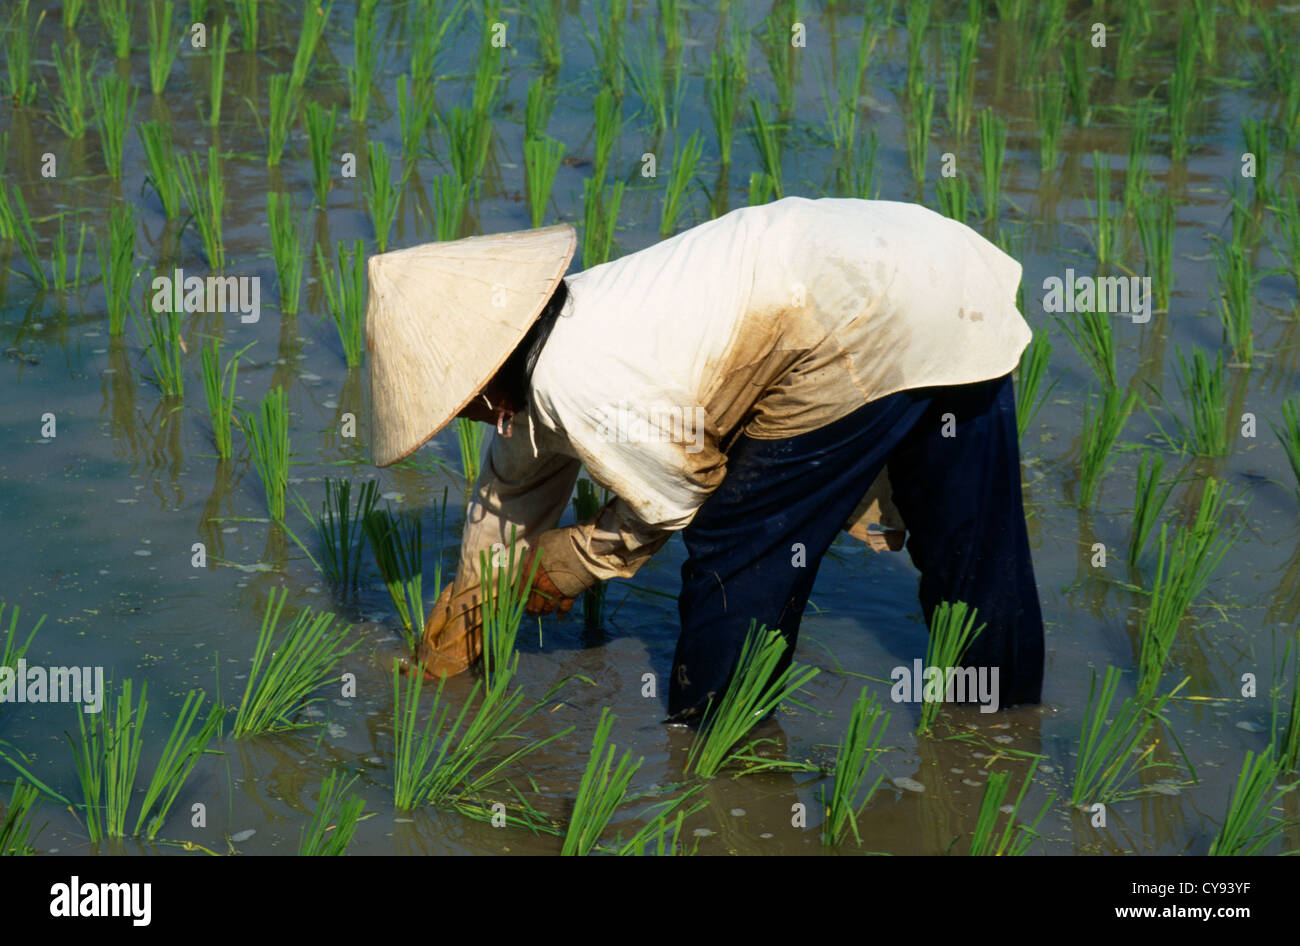 Malaysia, Langkawi, Oryza sativa, Rice, female worker wearing conical straw hat planting seedlings in a paddy field. Stock Photo